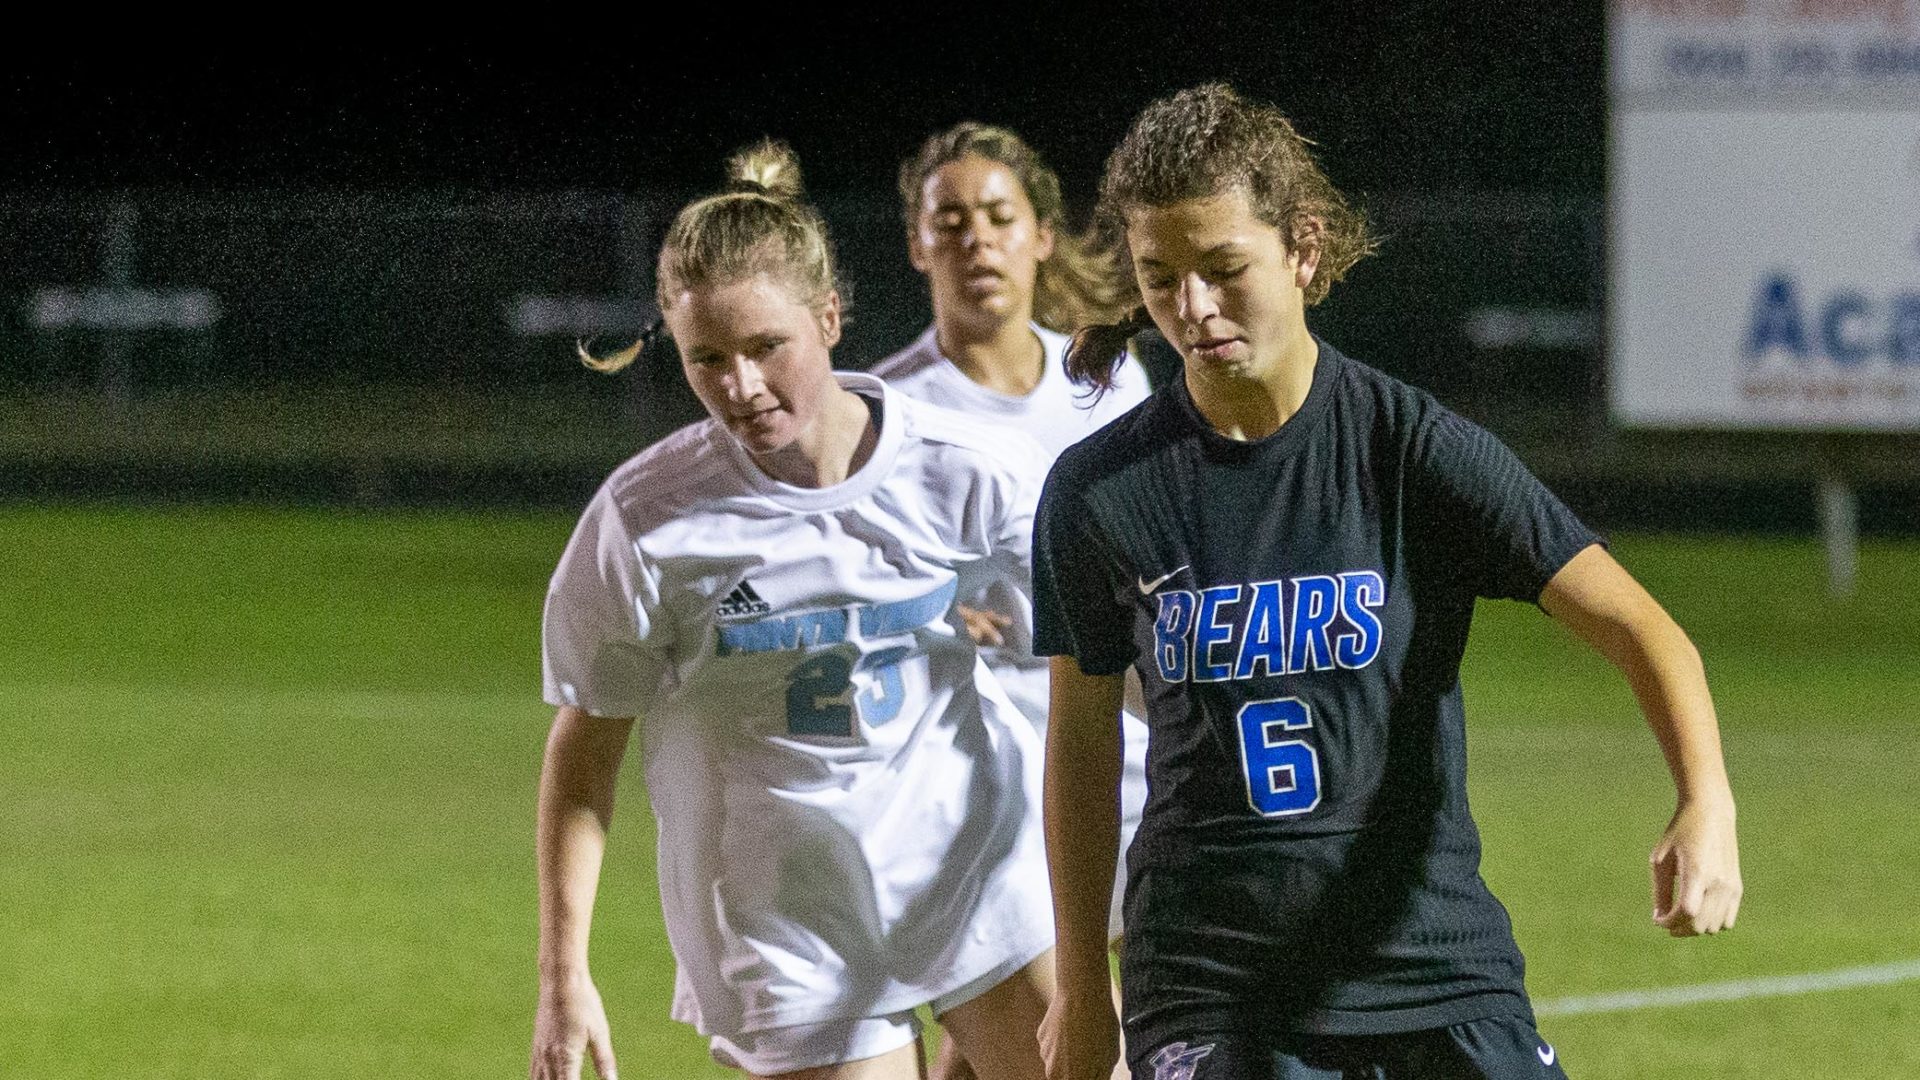 FHSAA unveils first girls soccer rankings